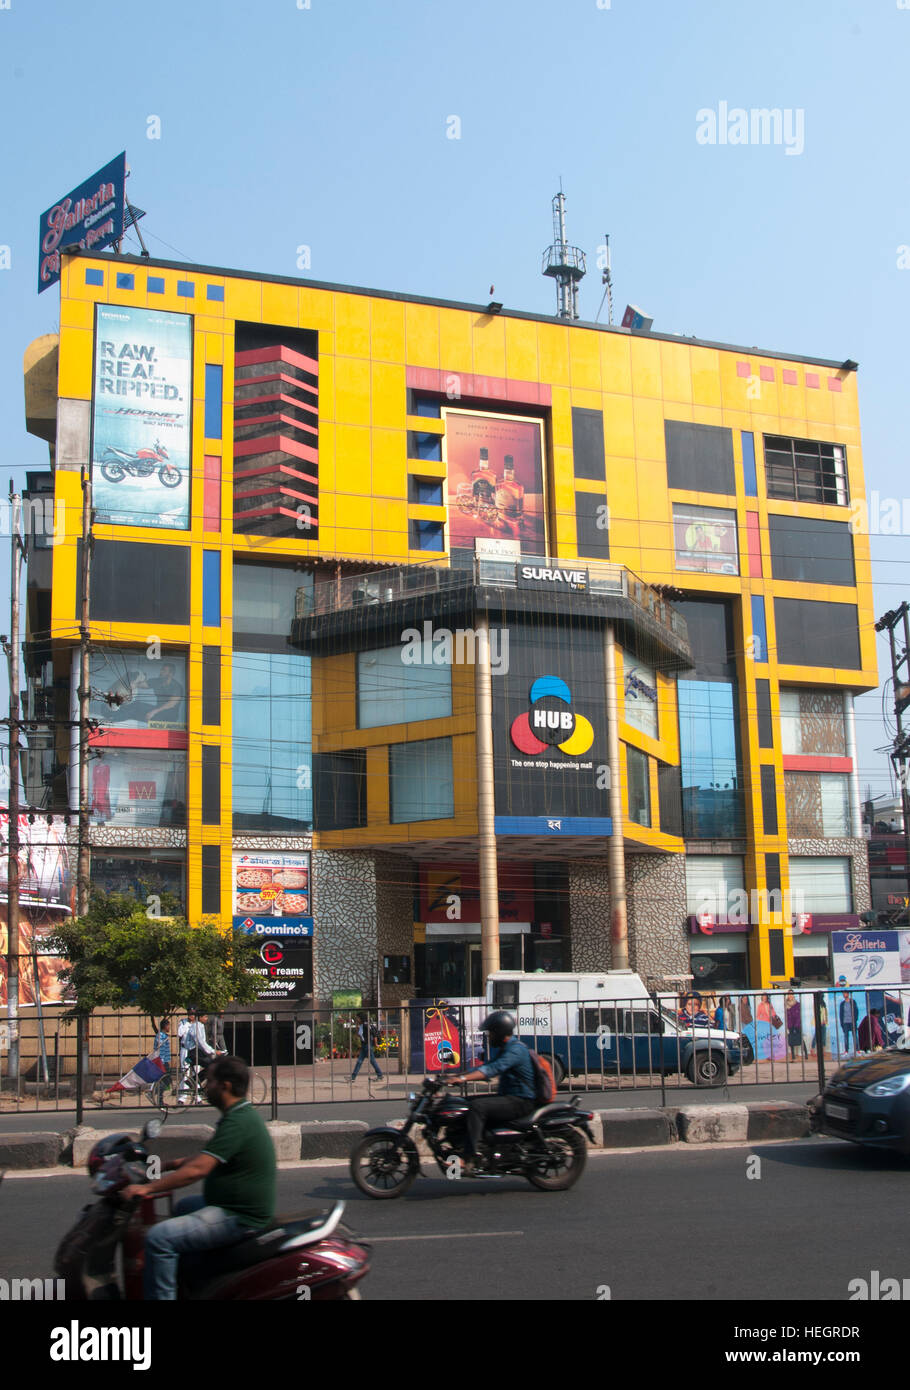 Shopping mall in G.S. Road, Guwahati, Assam, India Stock Photo